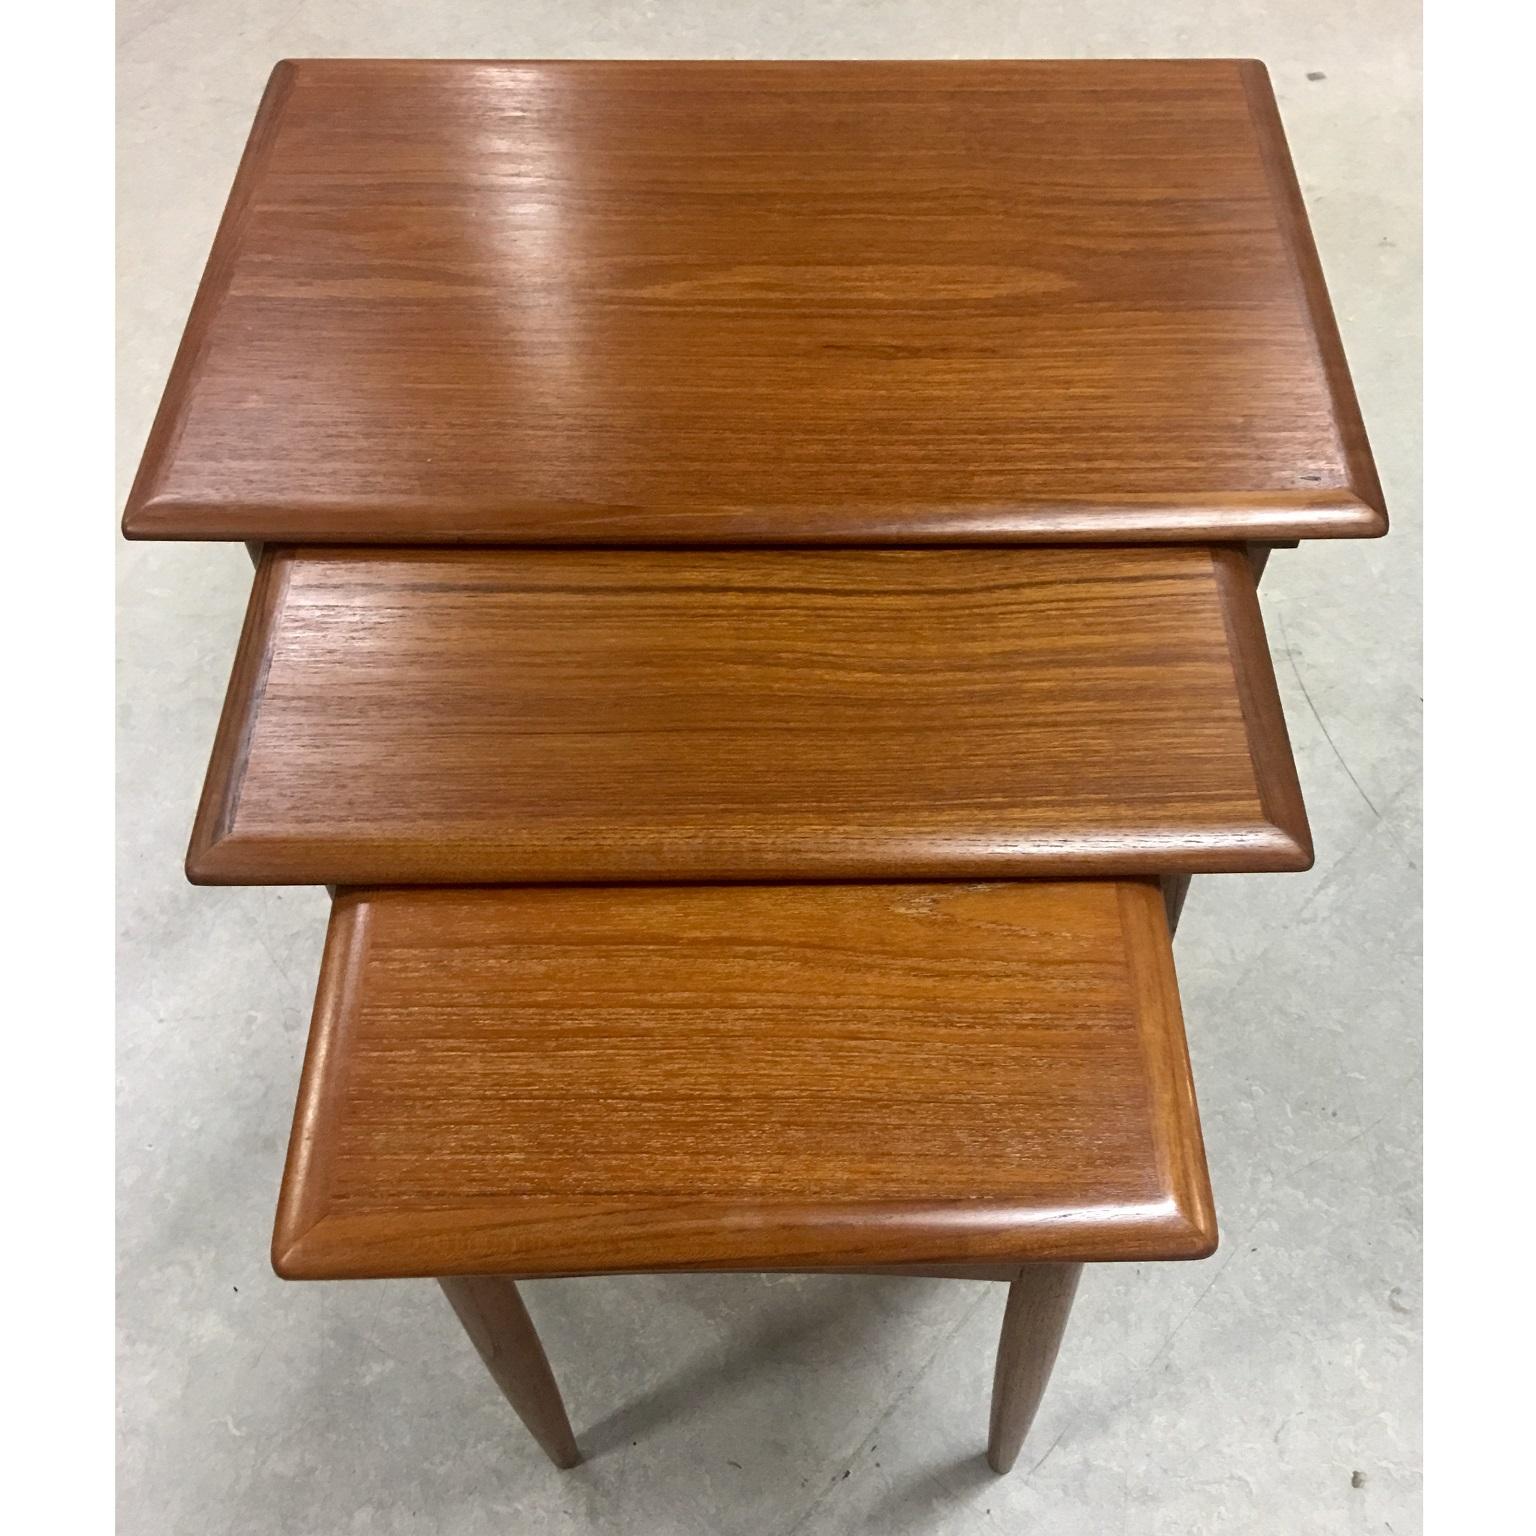 Danish midcentury teak nesting tables by Poul Hundevad, circa 1960s.

A nest of three teak nesting tables designed by Poul Hundevad and manufactured by Fabian in Denmark. Beautiful tapered legs and curved stretchers, the small and medium table